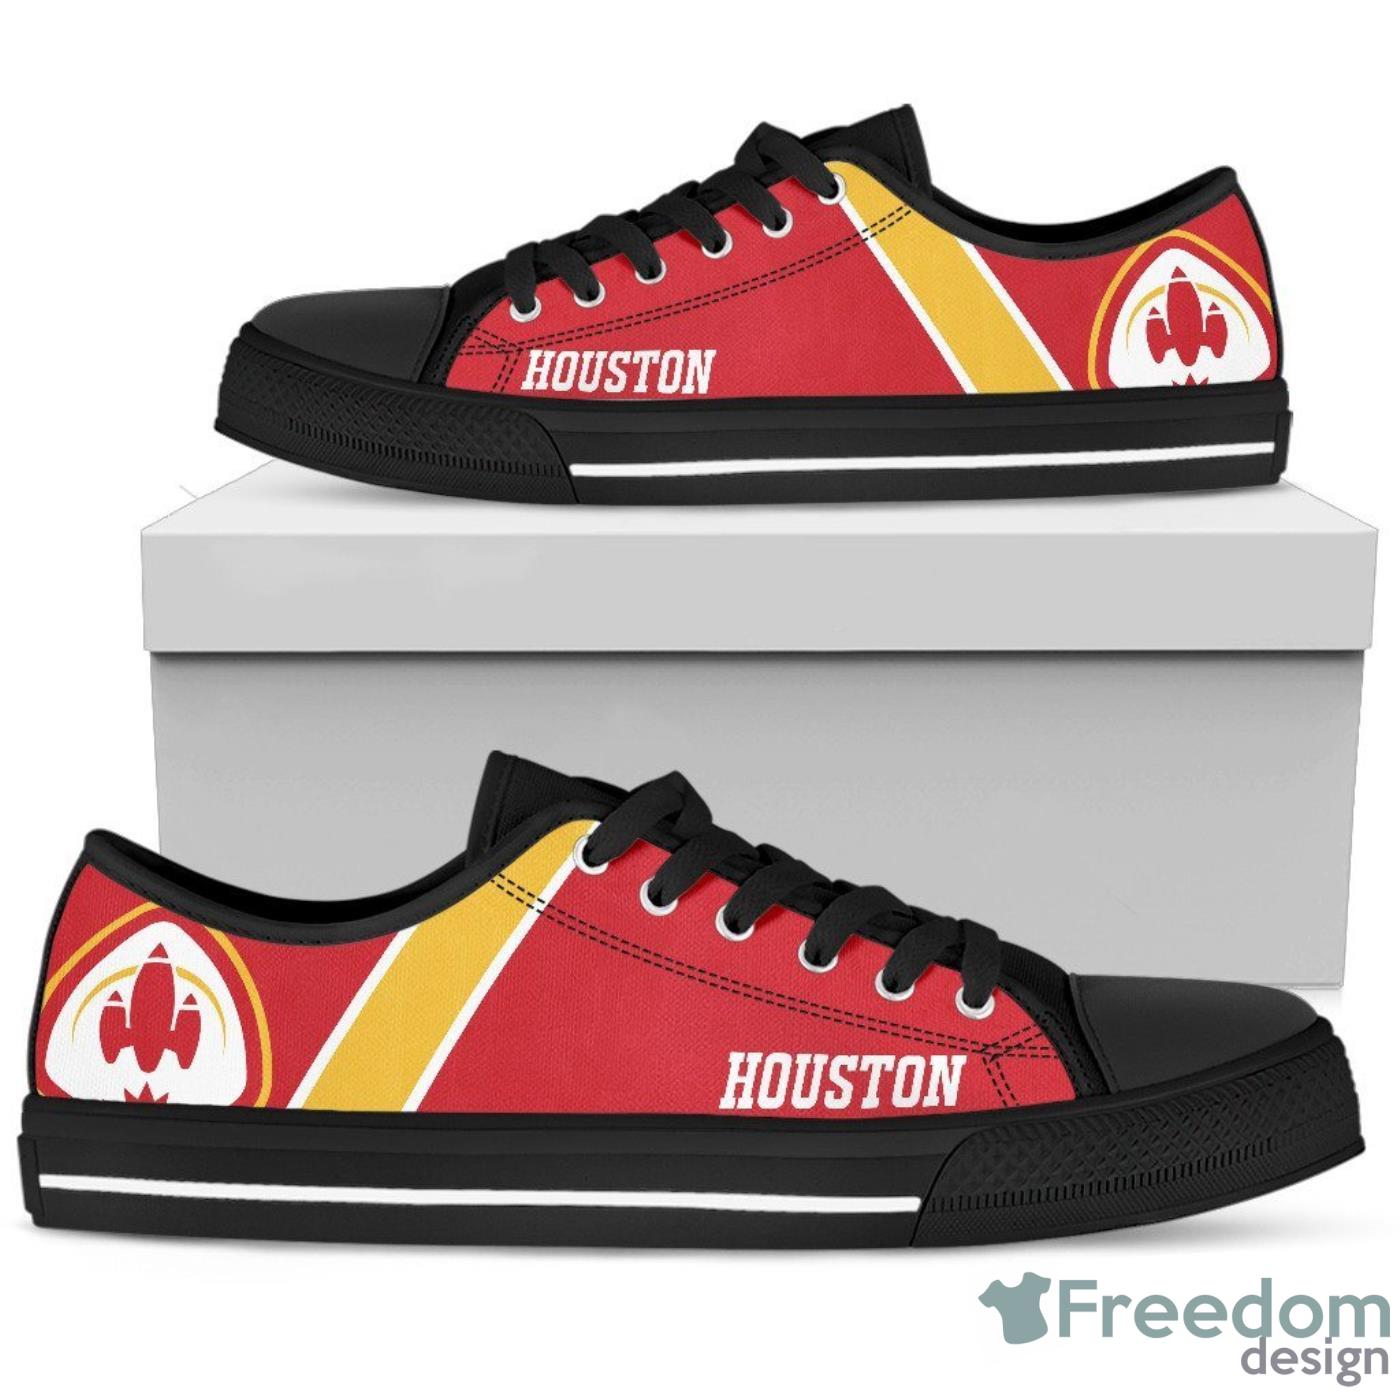 Houston Casual Sneakers Low Top Canvas Shoes For Men And Women Product Photo 1